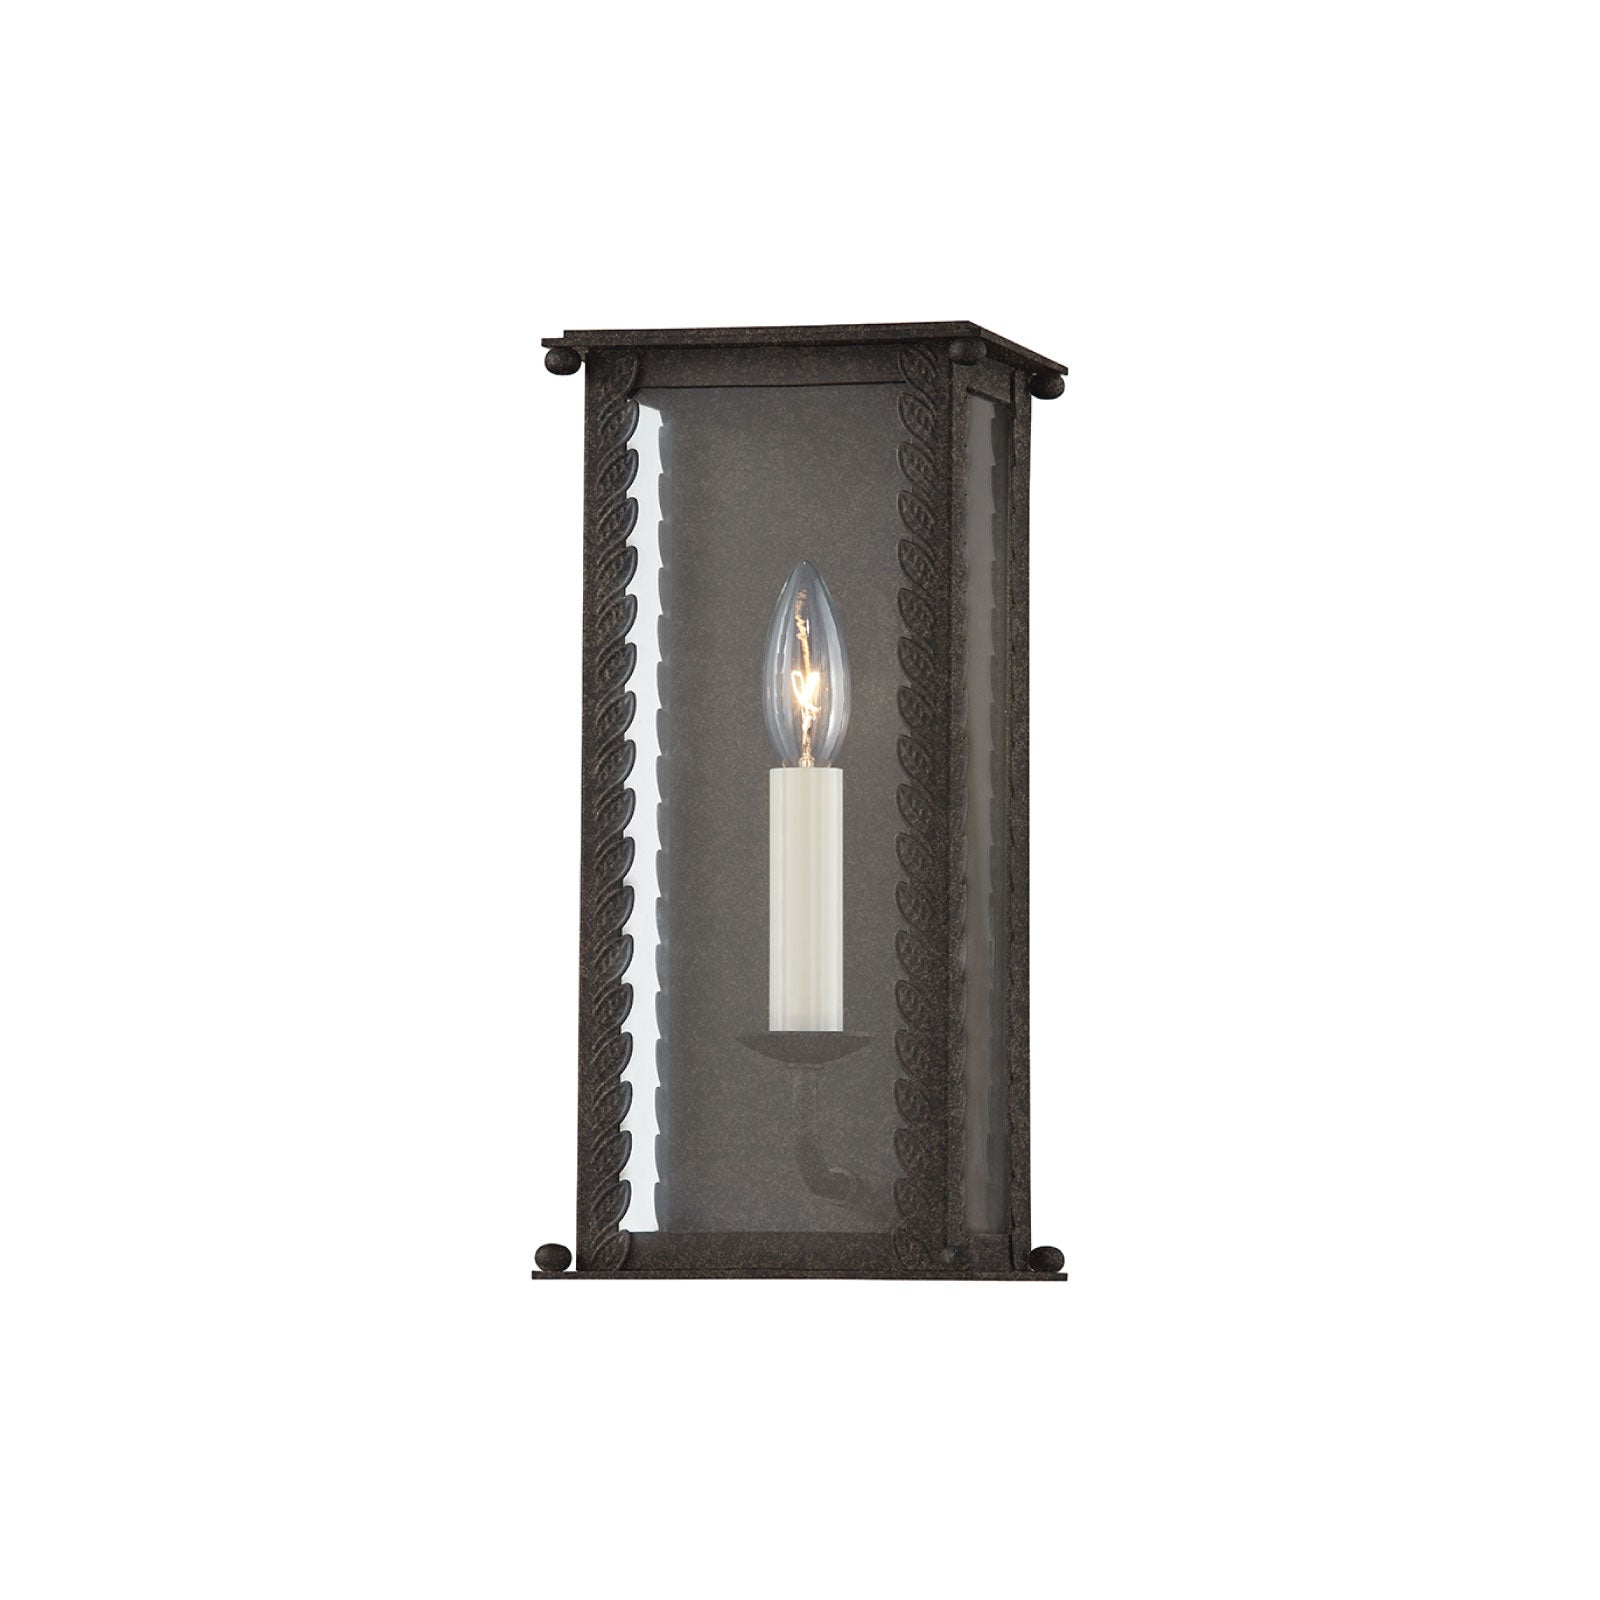 Belle Meade Small Outdoor Wall Lantern in French Iron